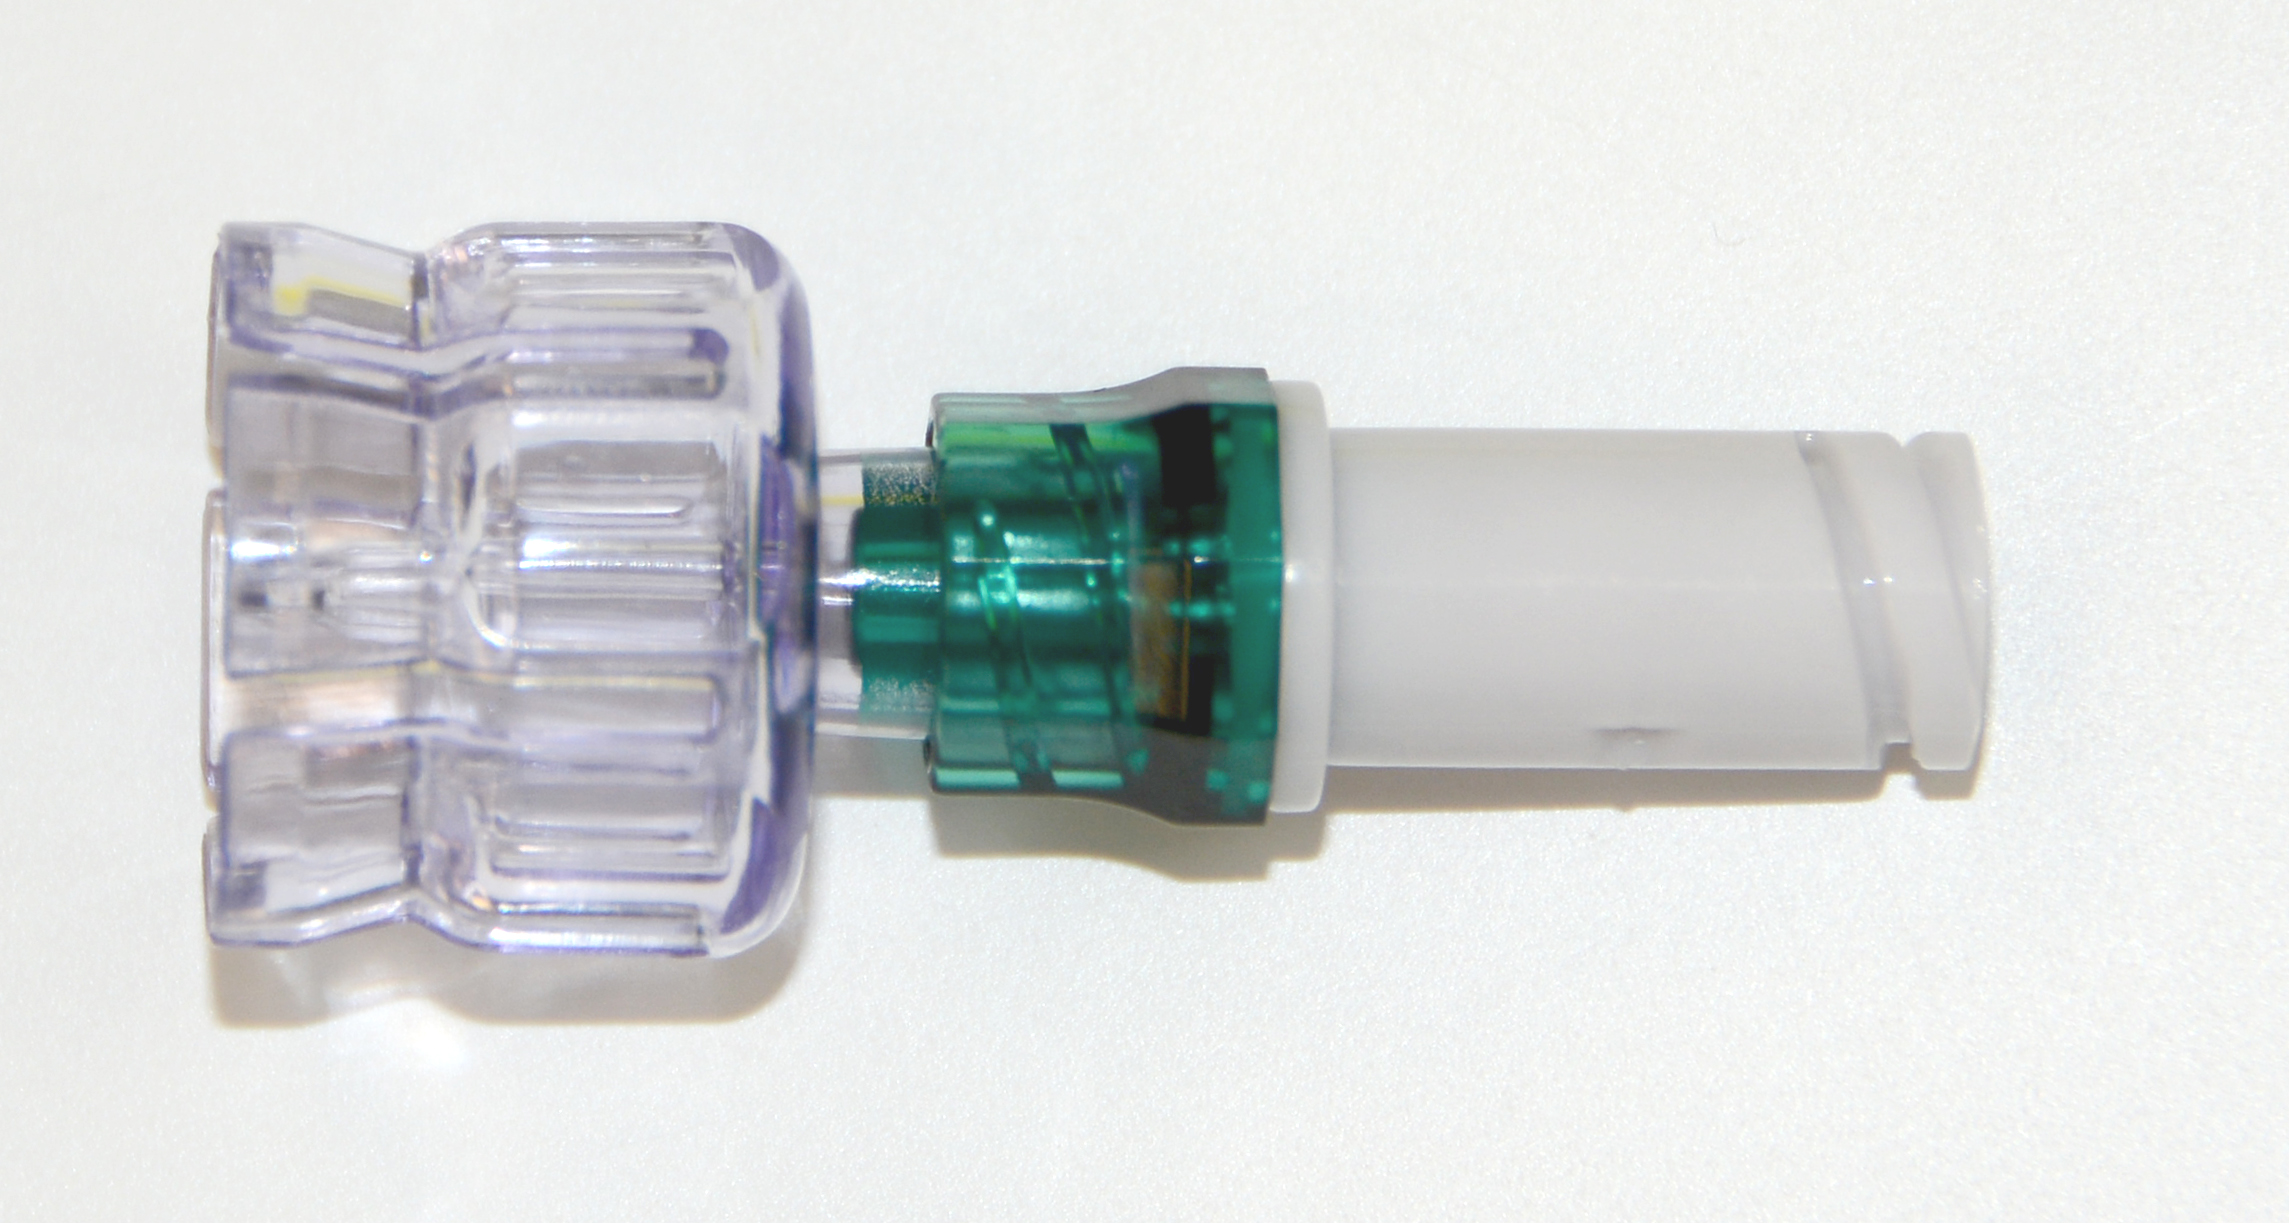 Needle-free vial access cap with Bionector